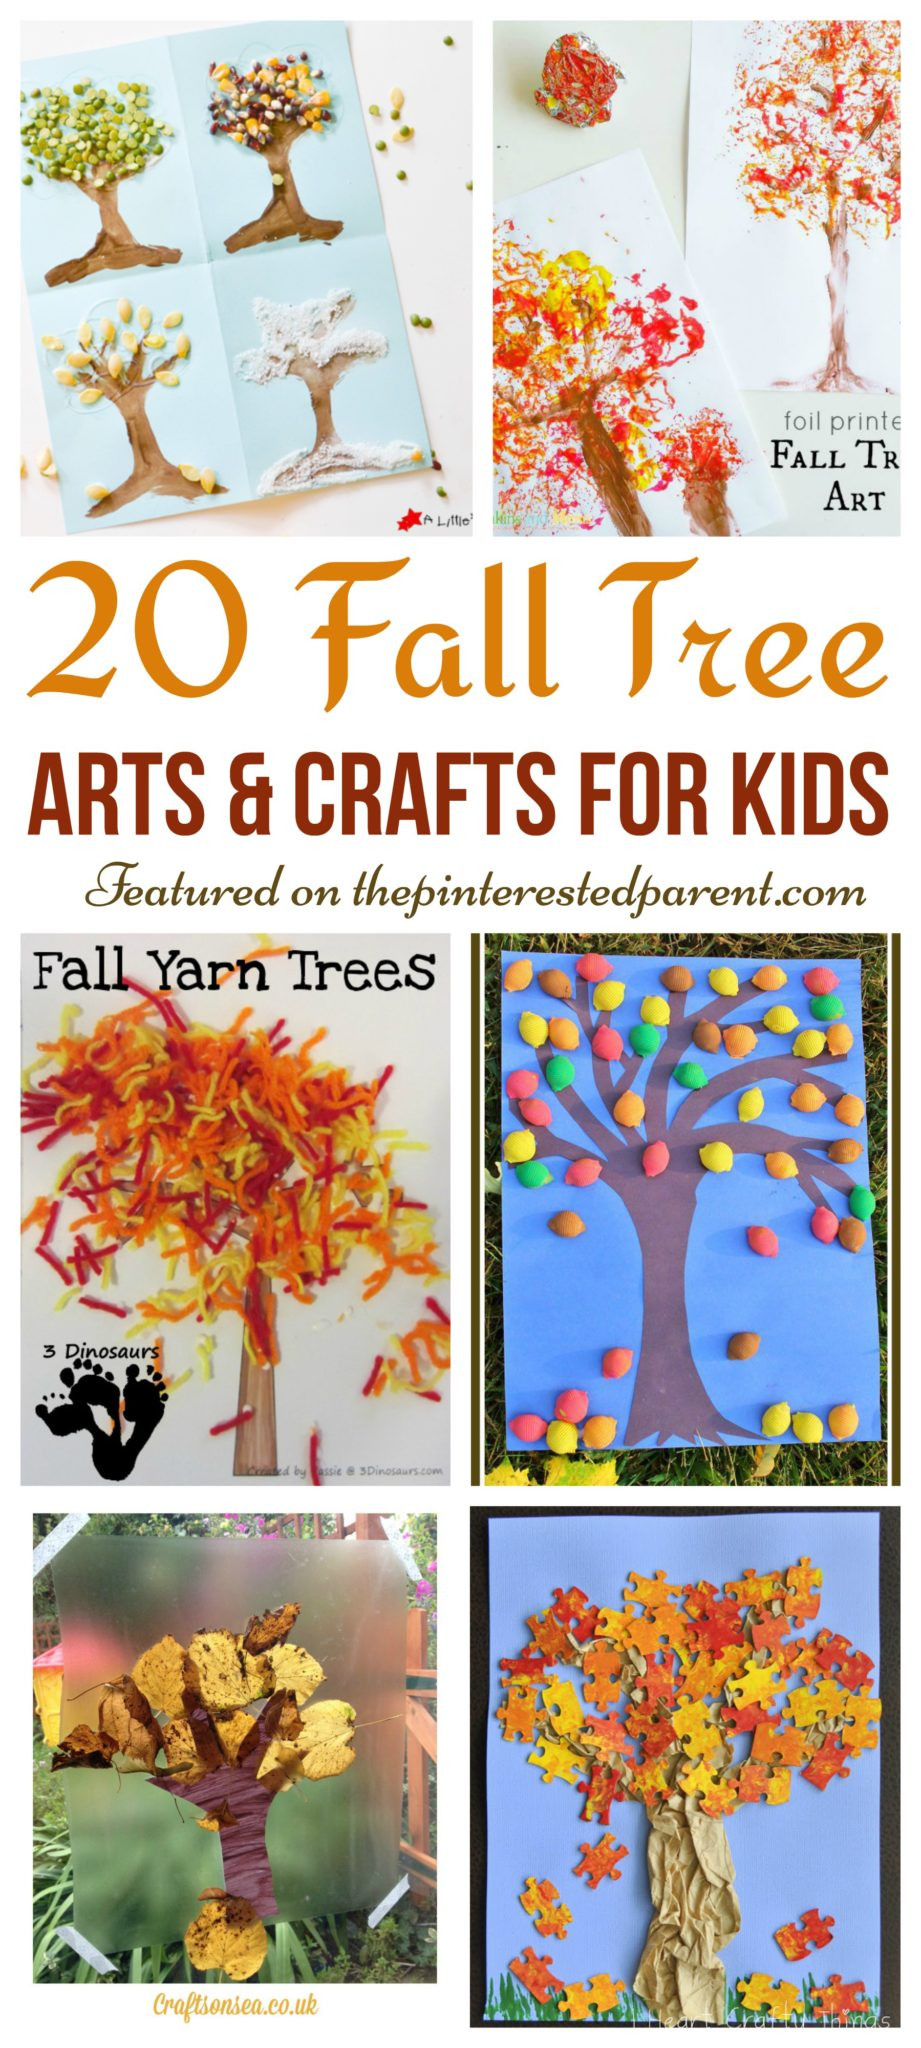 Art And Craft Ideas For Preschoolers
 20 Fall Tree Arts & Crafts Ideas For Kids – The